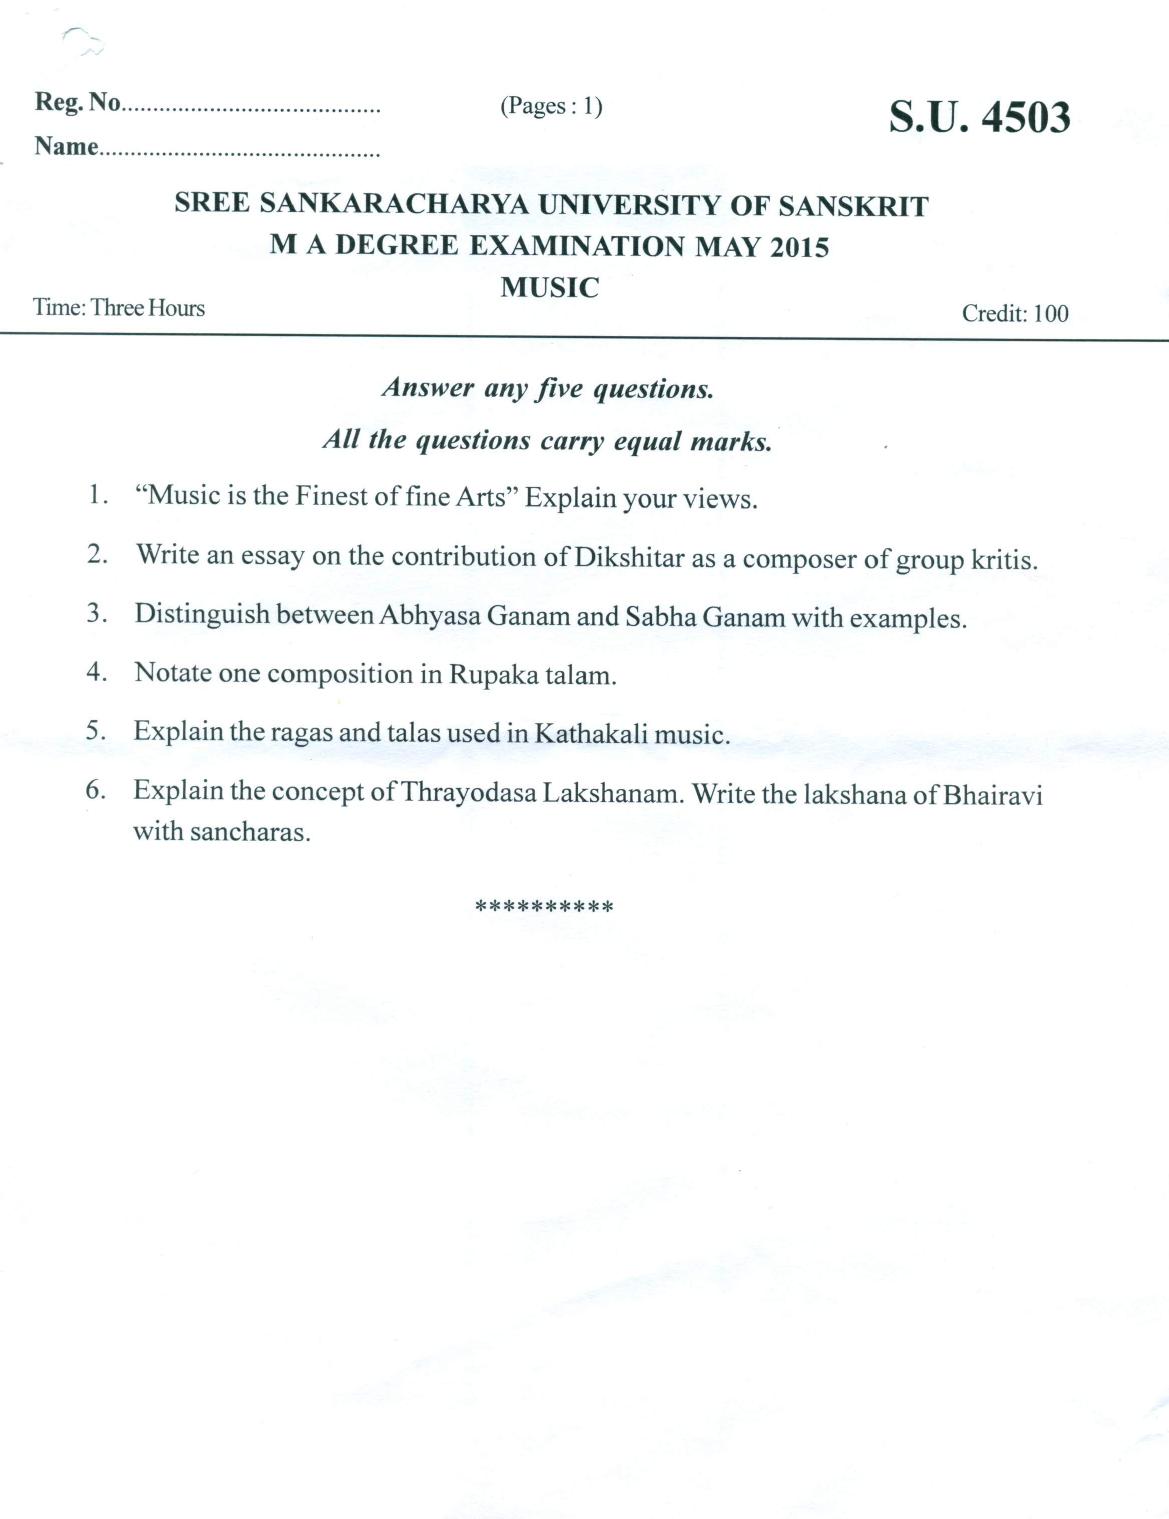 SSUS Entrance Exam MUSIC 2015 Question Paper - Page 1